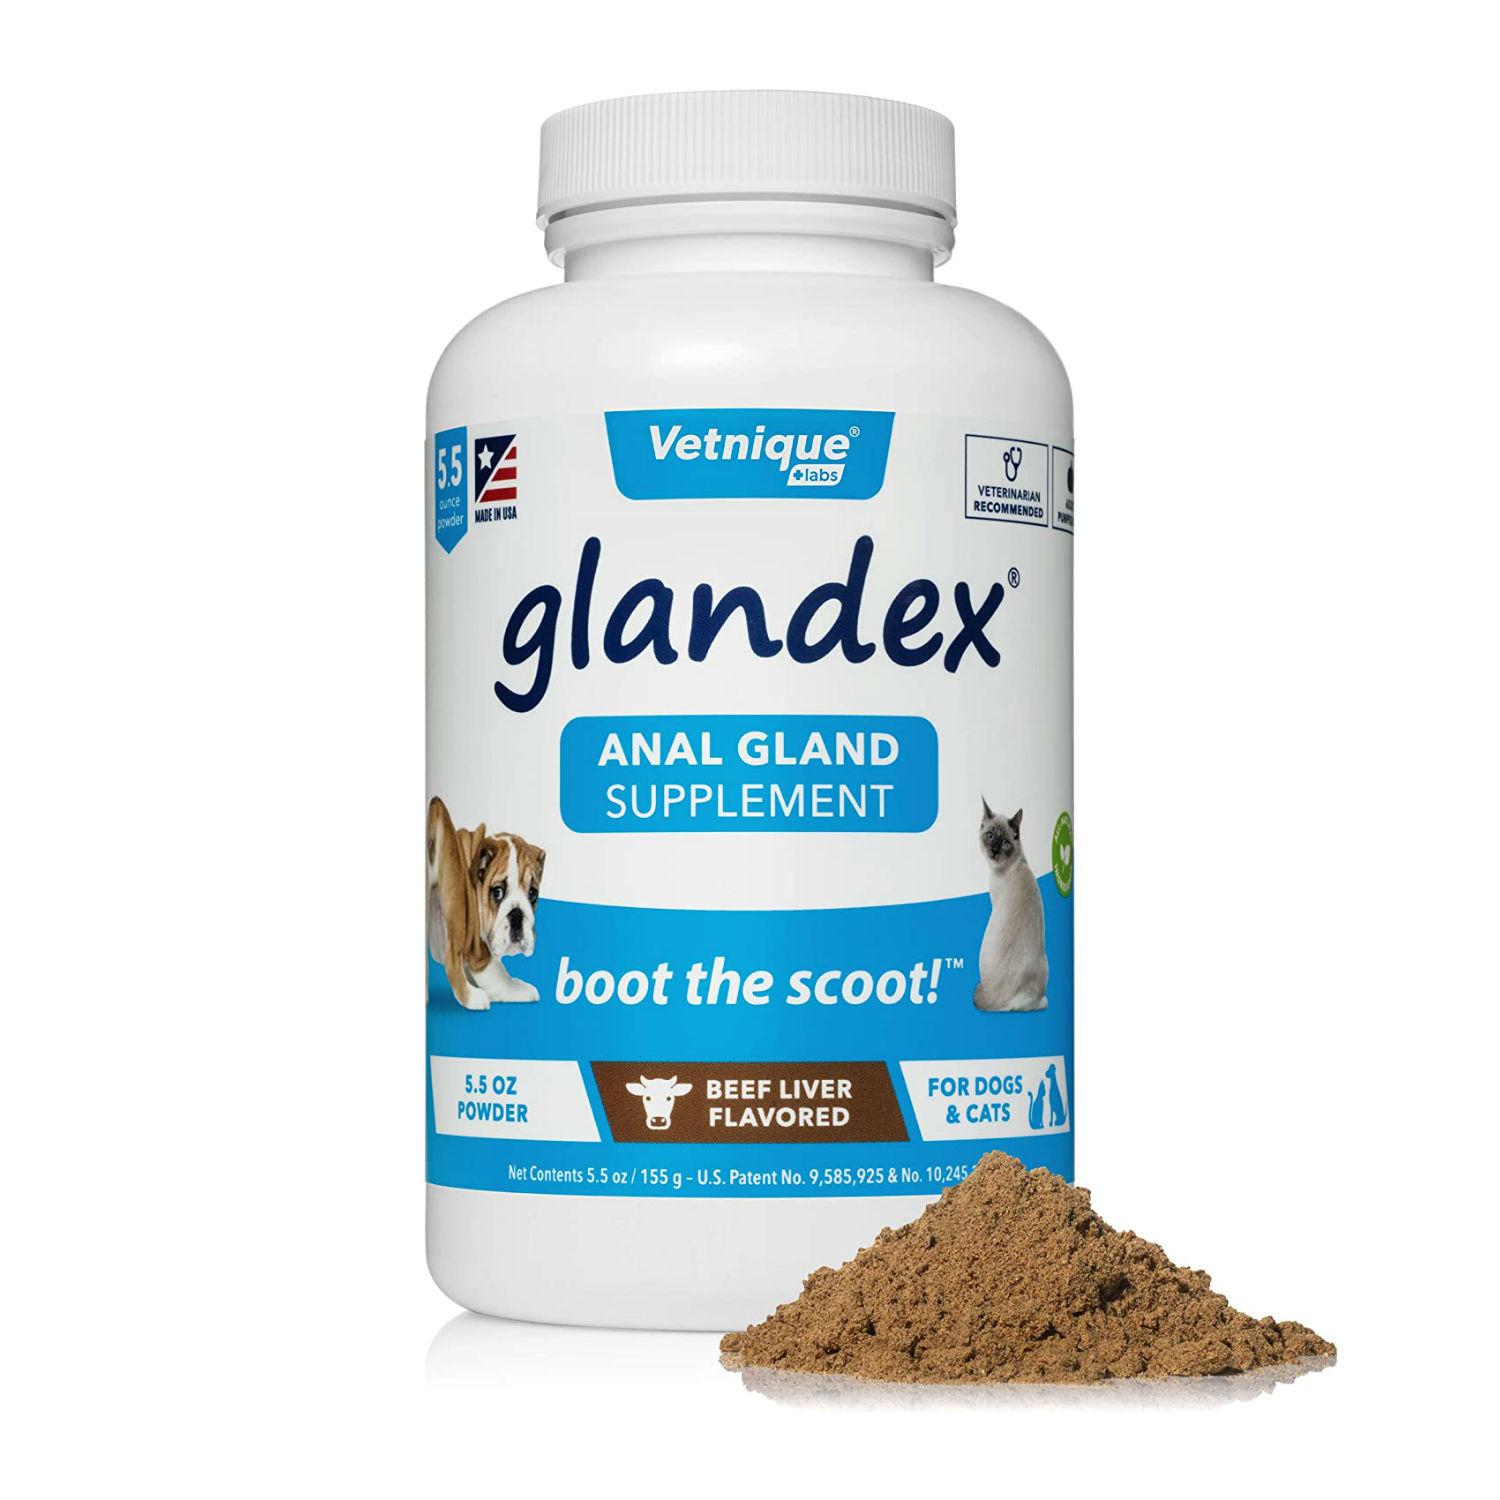 Vetnique Glandex Anal Gland Support for Dogs and Cats - Beef Powder